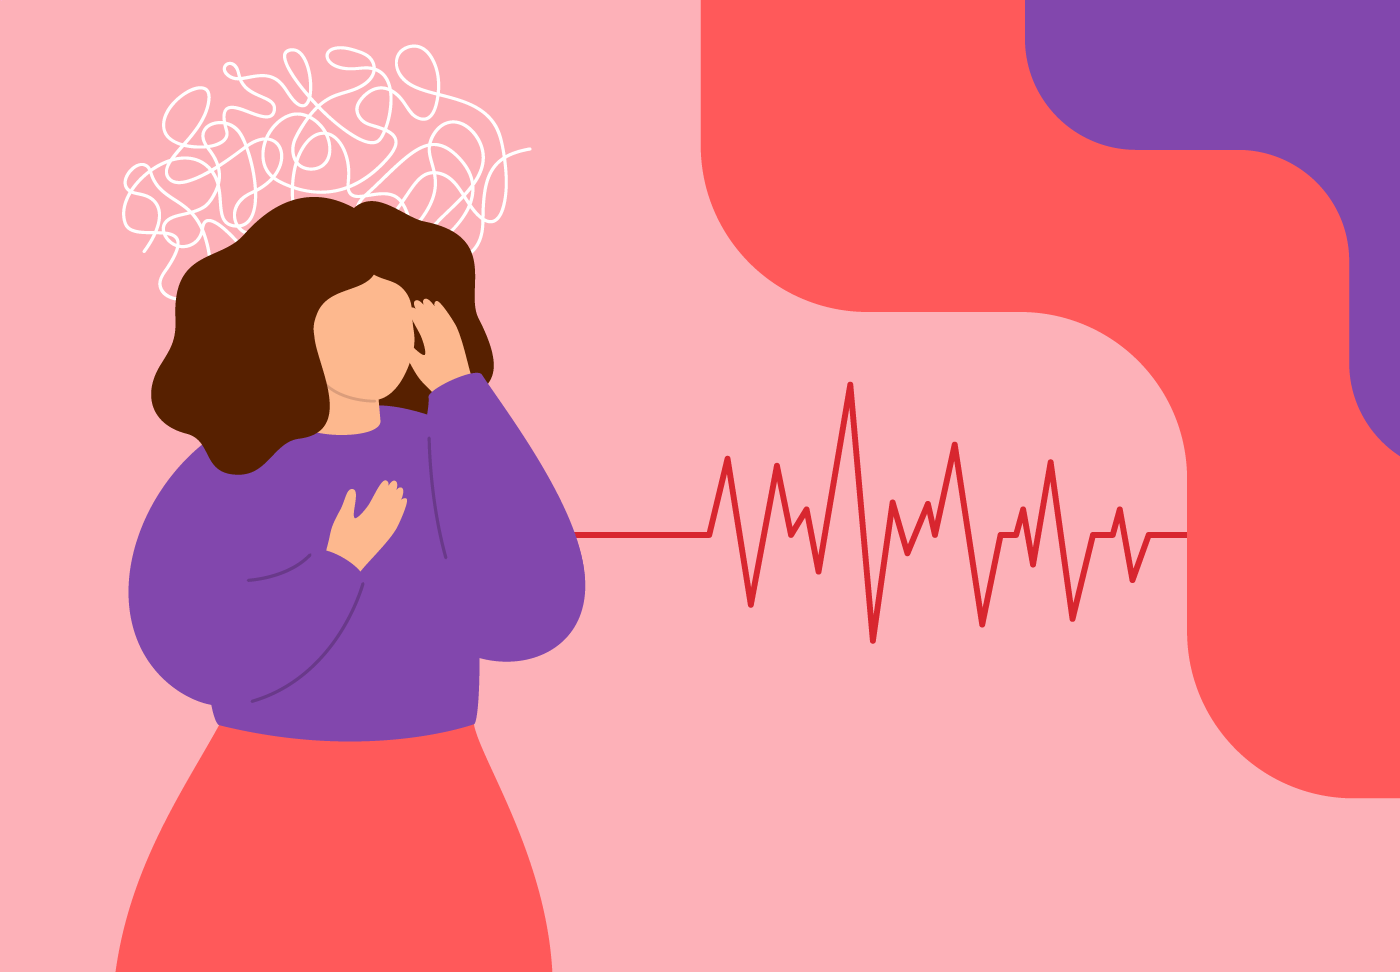 Illustration of person with waves above their head and coming from heart, experiencing sudden heart rate increase